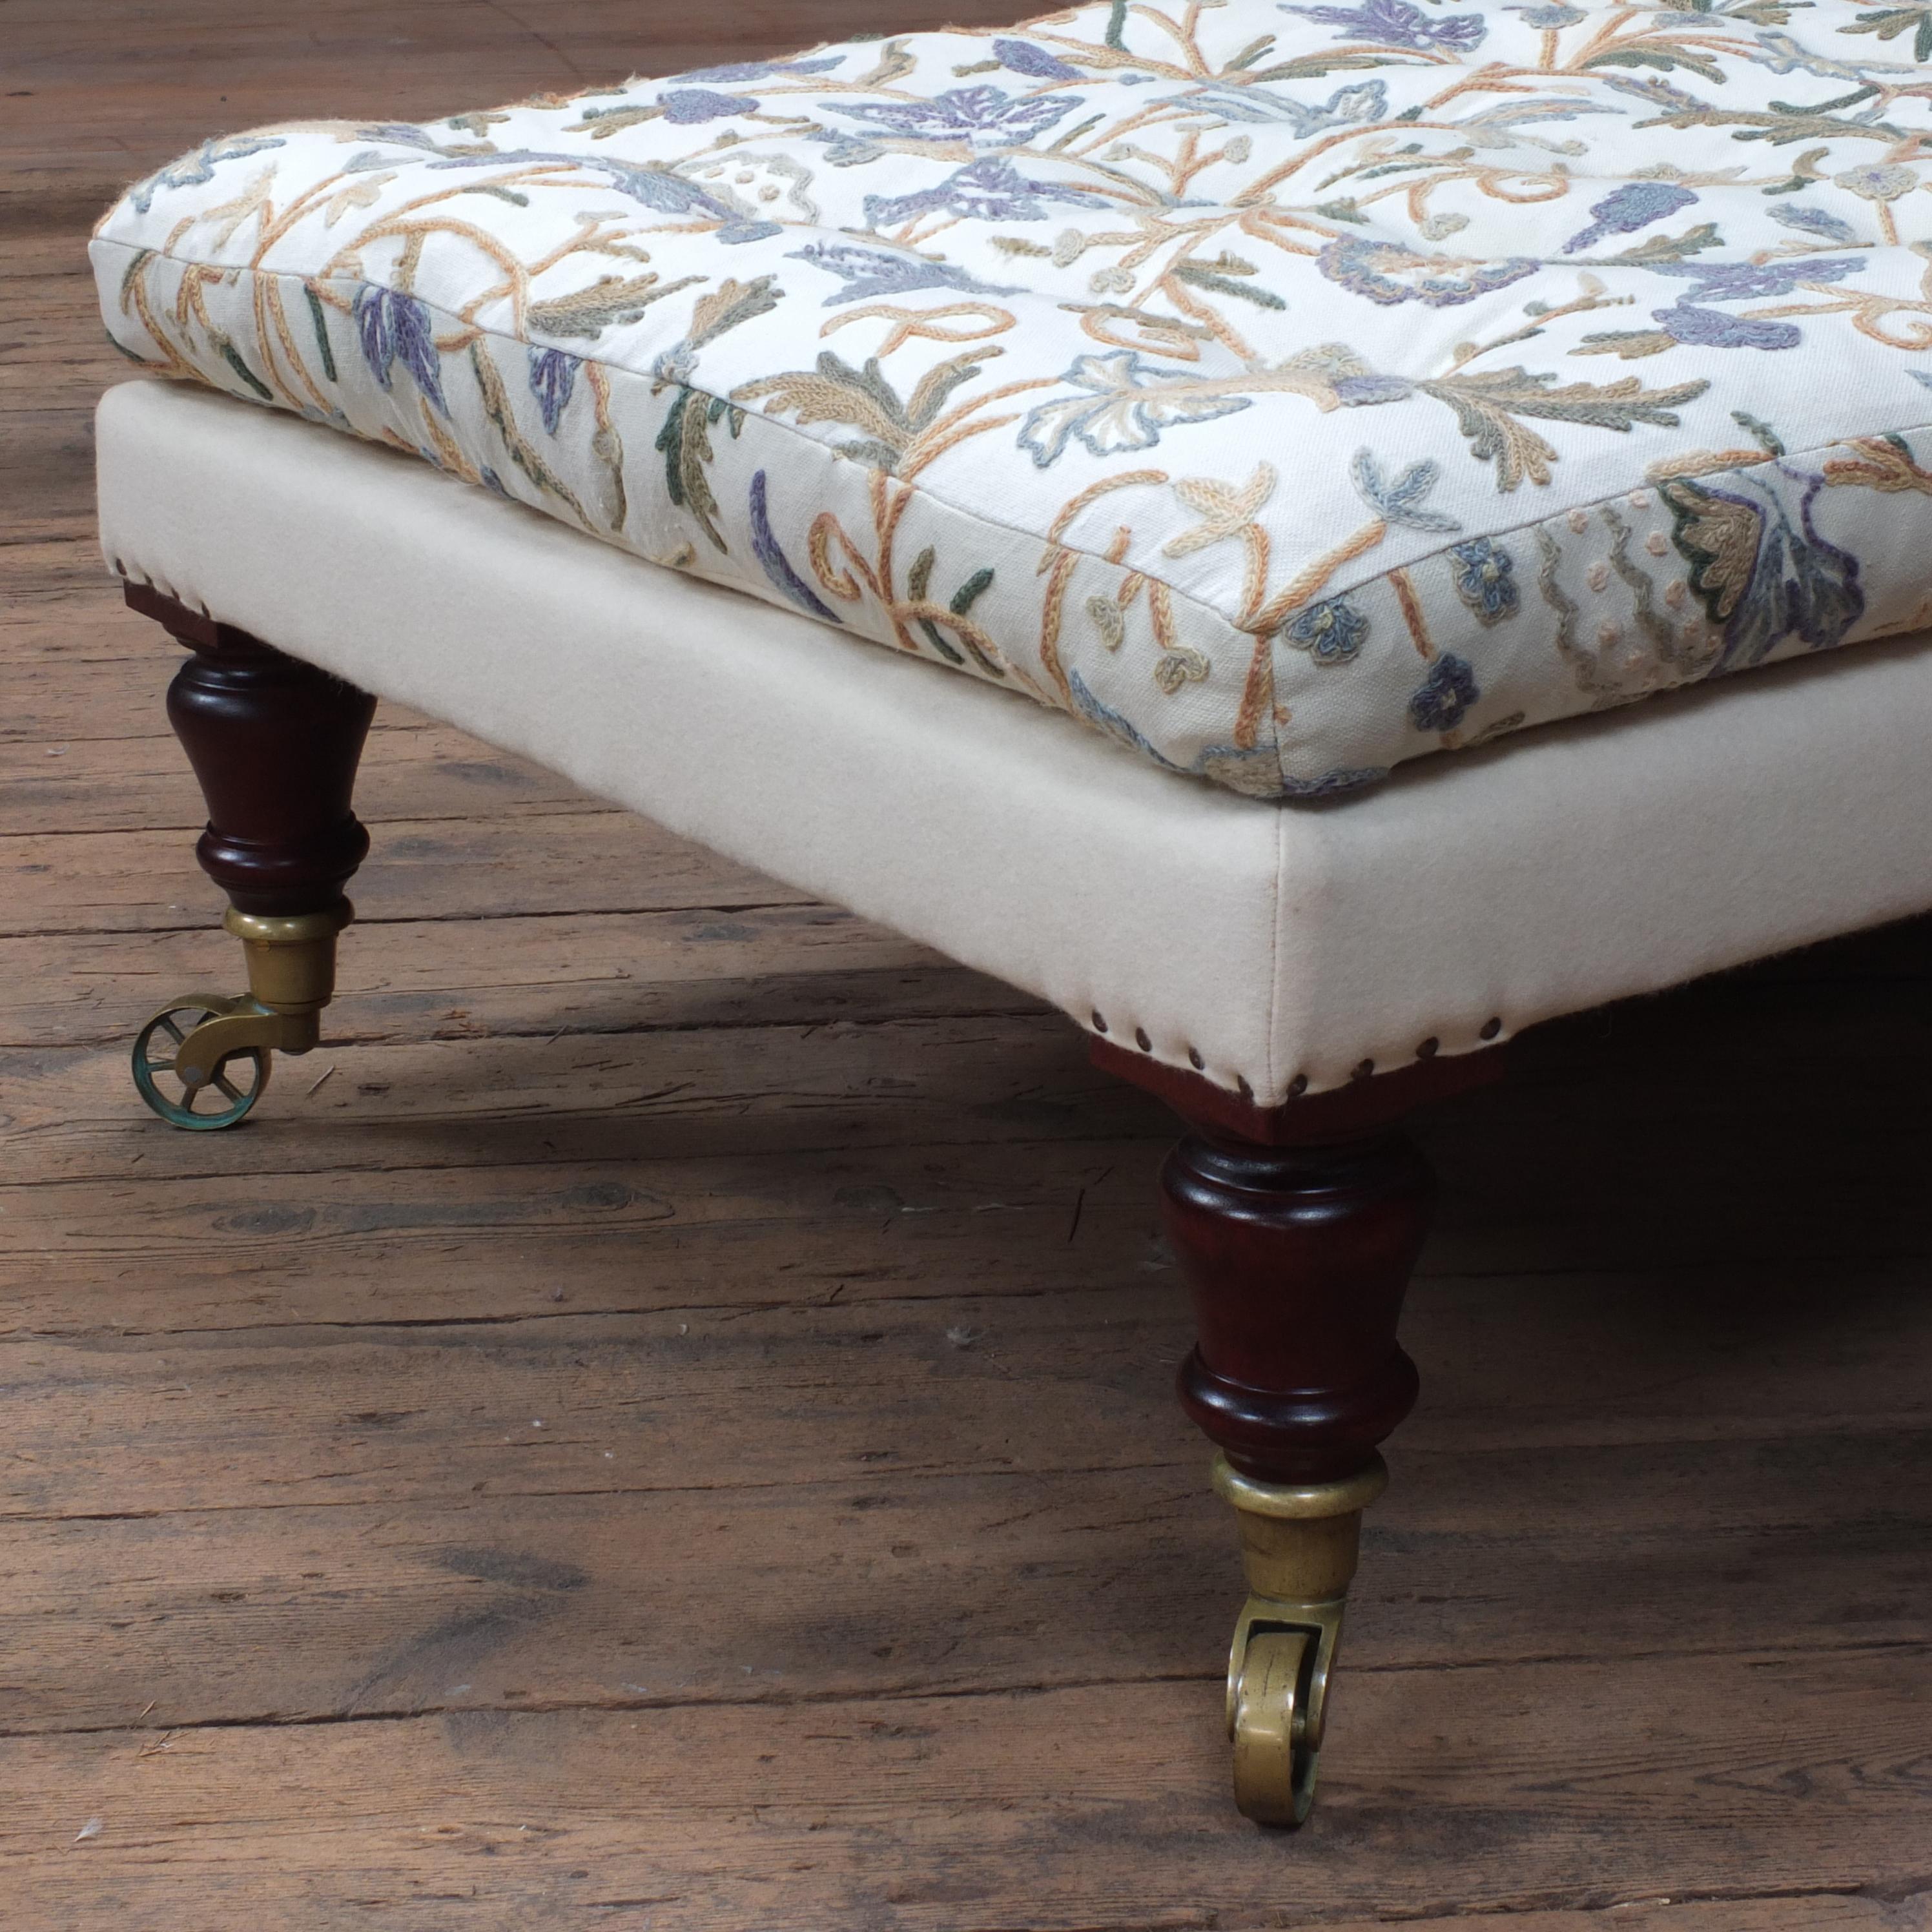 English Large Antique Style Country House Footstool in Vintage Crewel Work Fabric